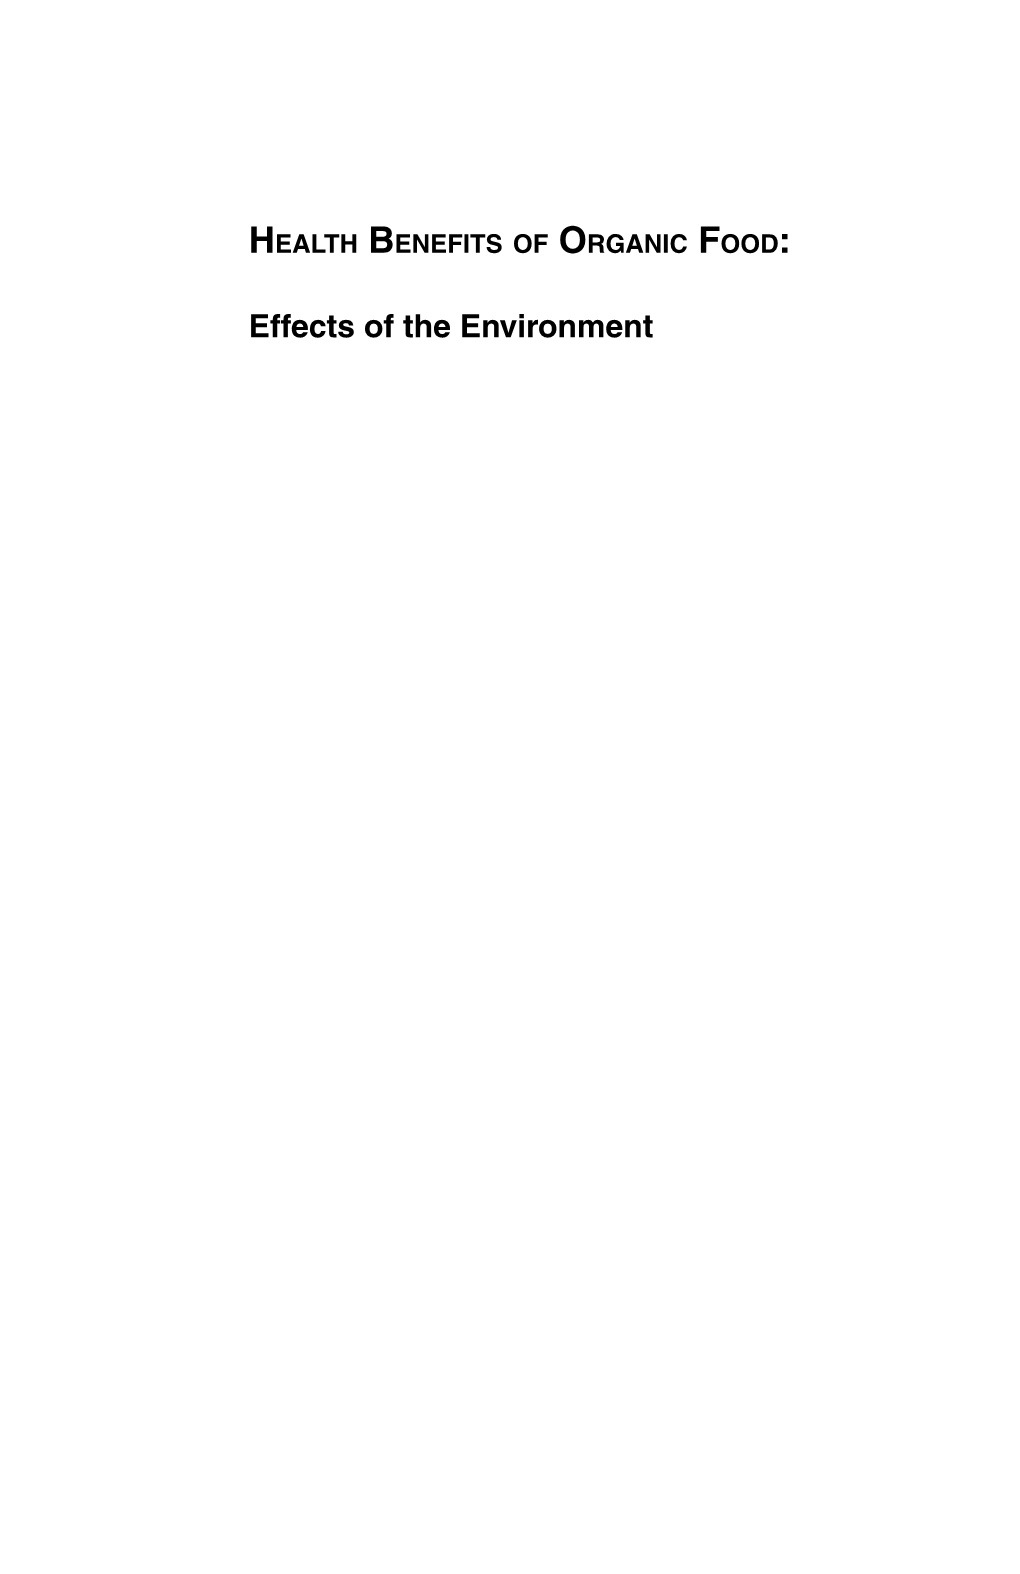 Effects of the Environment This Page Intentionally Left Blank HEALTH BENEFITS of ORGANIC FOOD: Effects of the Environment